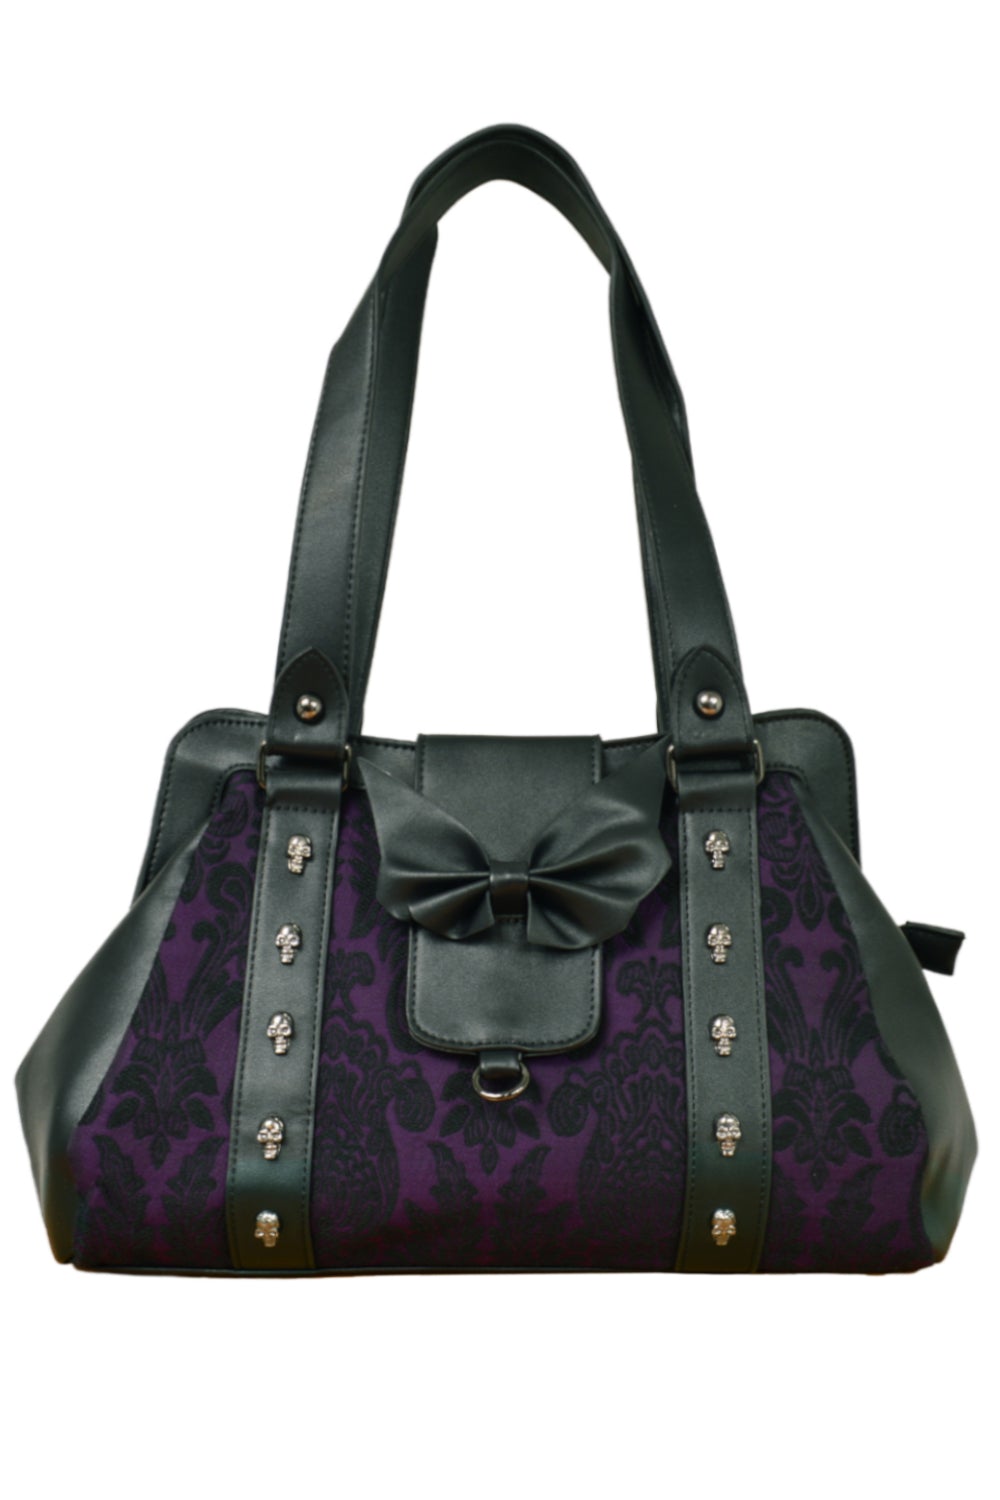 Dark green and purple shoulder bag with skull studs, lace features and black matte bow. 